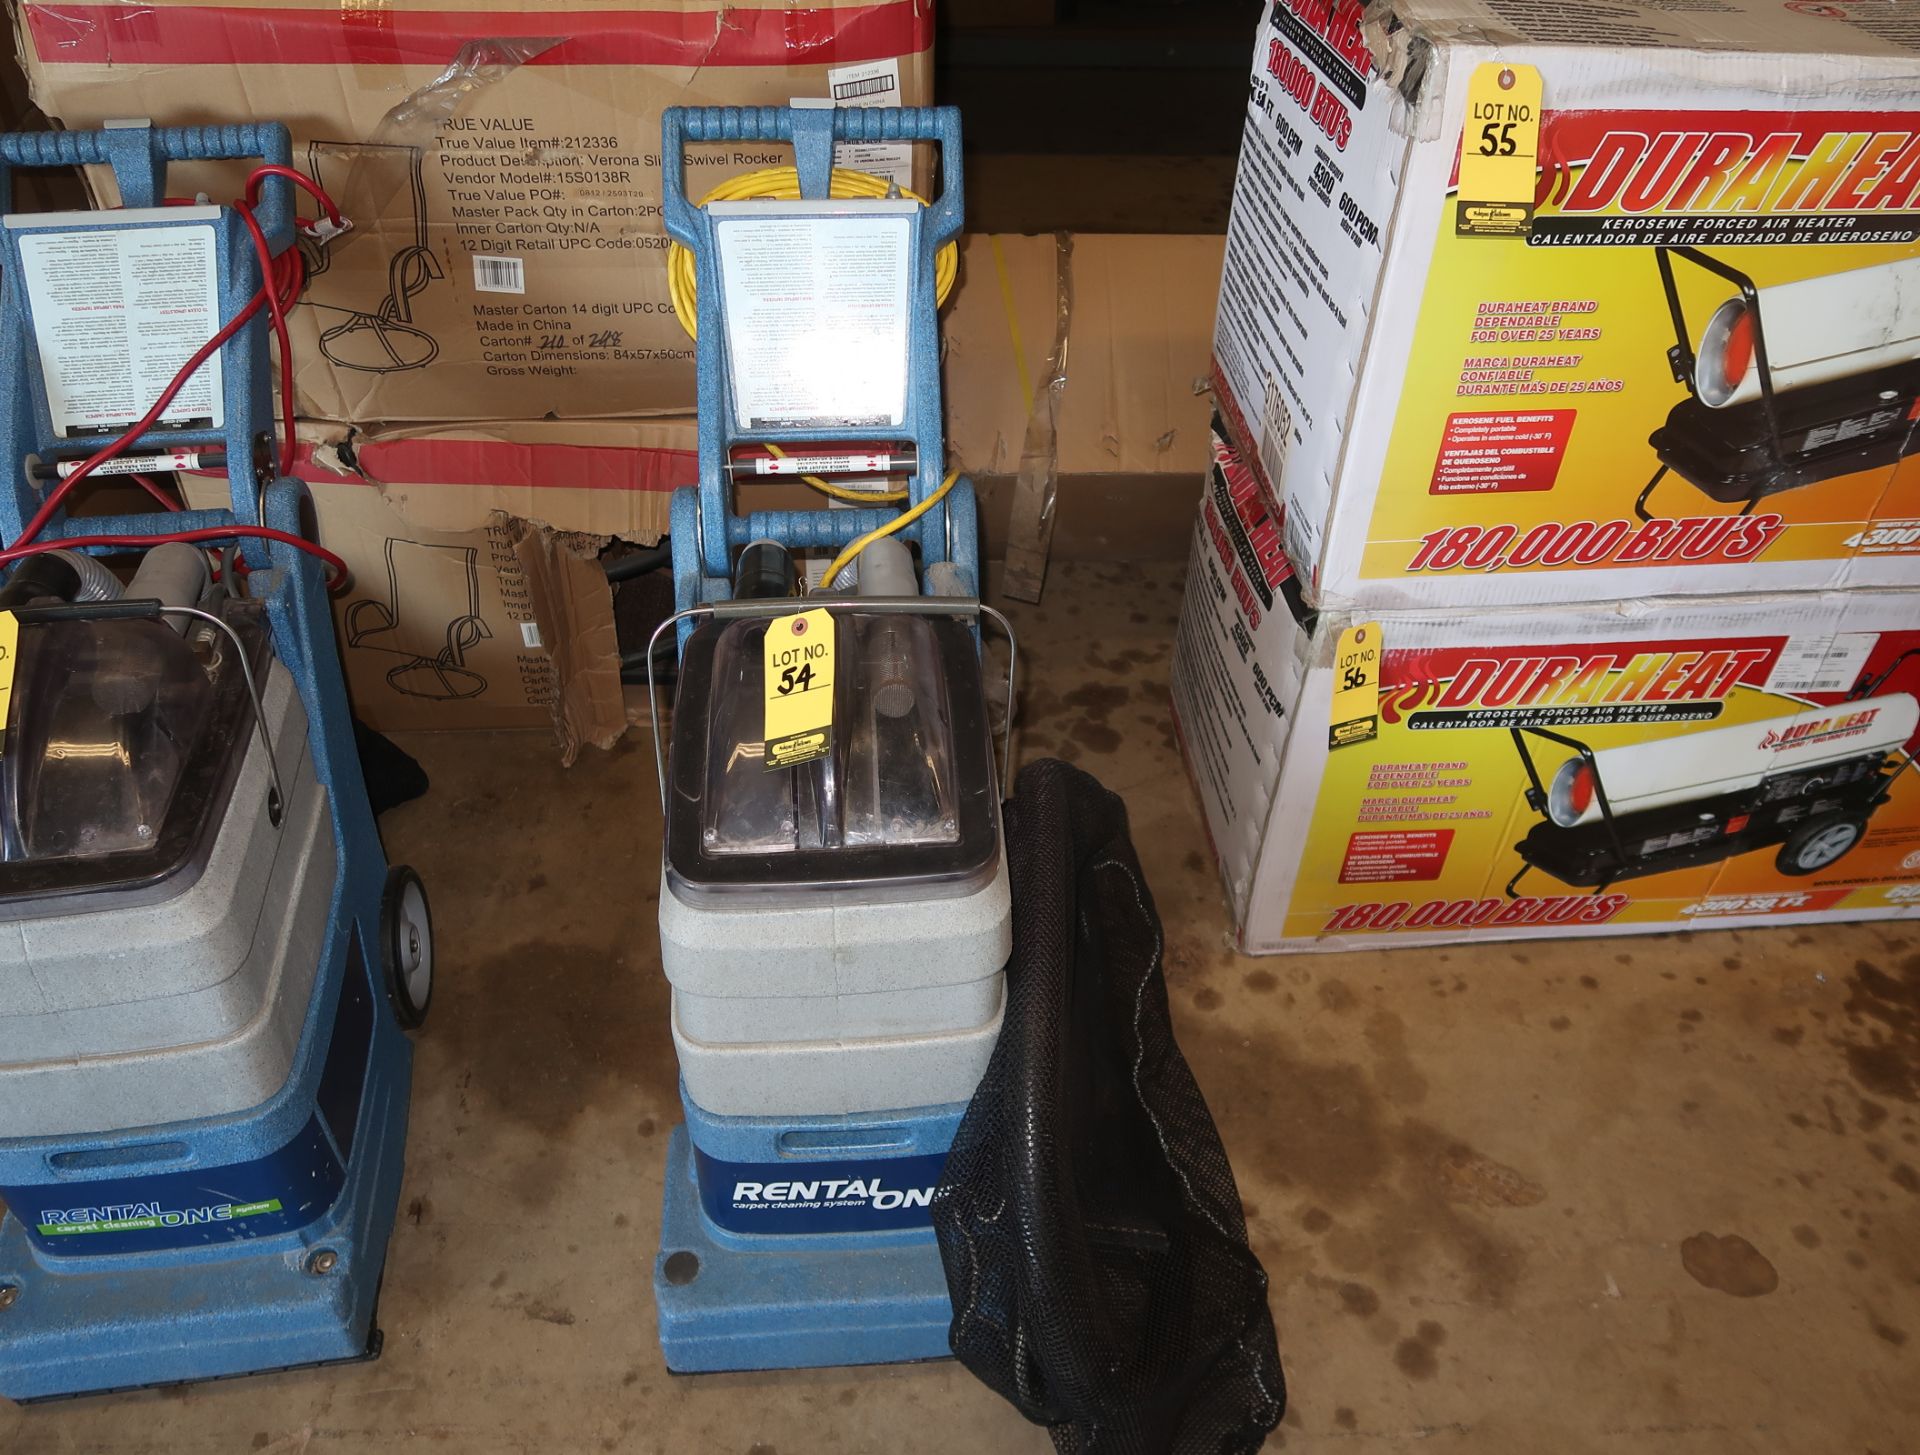 RENTAL ONE CARPET CLEANING SYSTEM W/ SOME ATTACHMENTS MDL. 401TR-TV (USED)